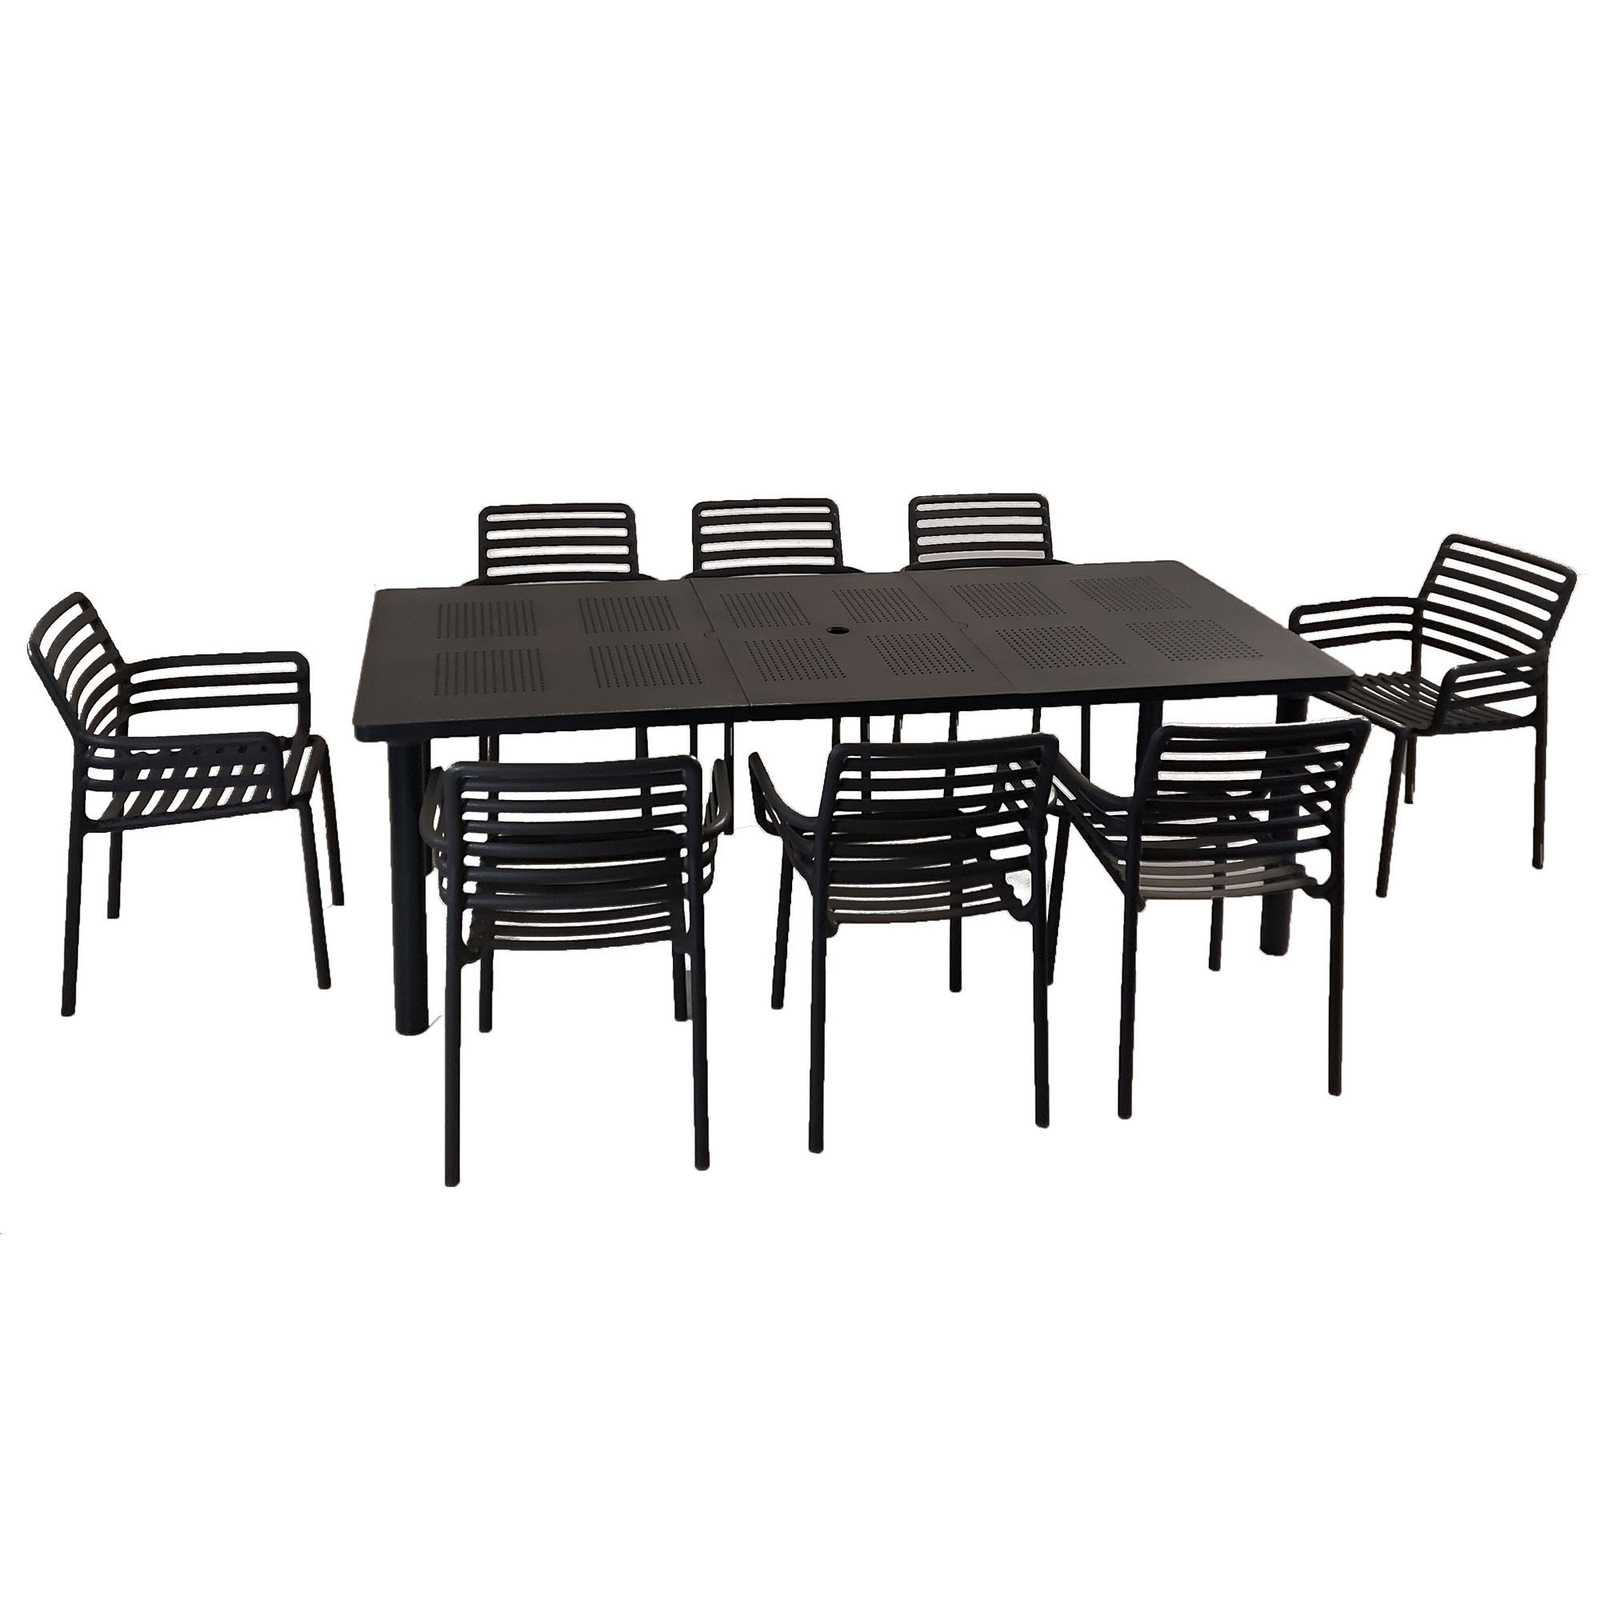 Nardi Libeccio Extending  Dining Table with 8 Doga Chairs in Anthracite Garden Dining Set Dining Sets Nardi   